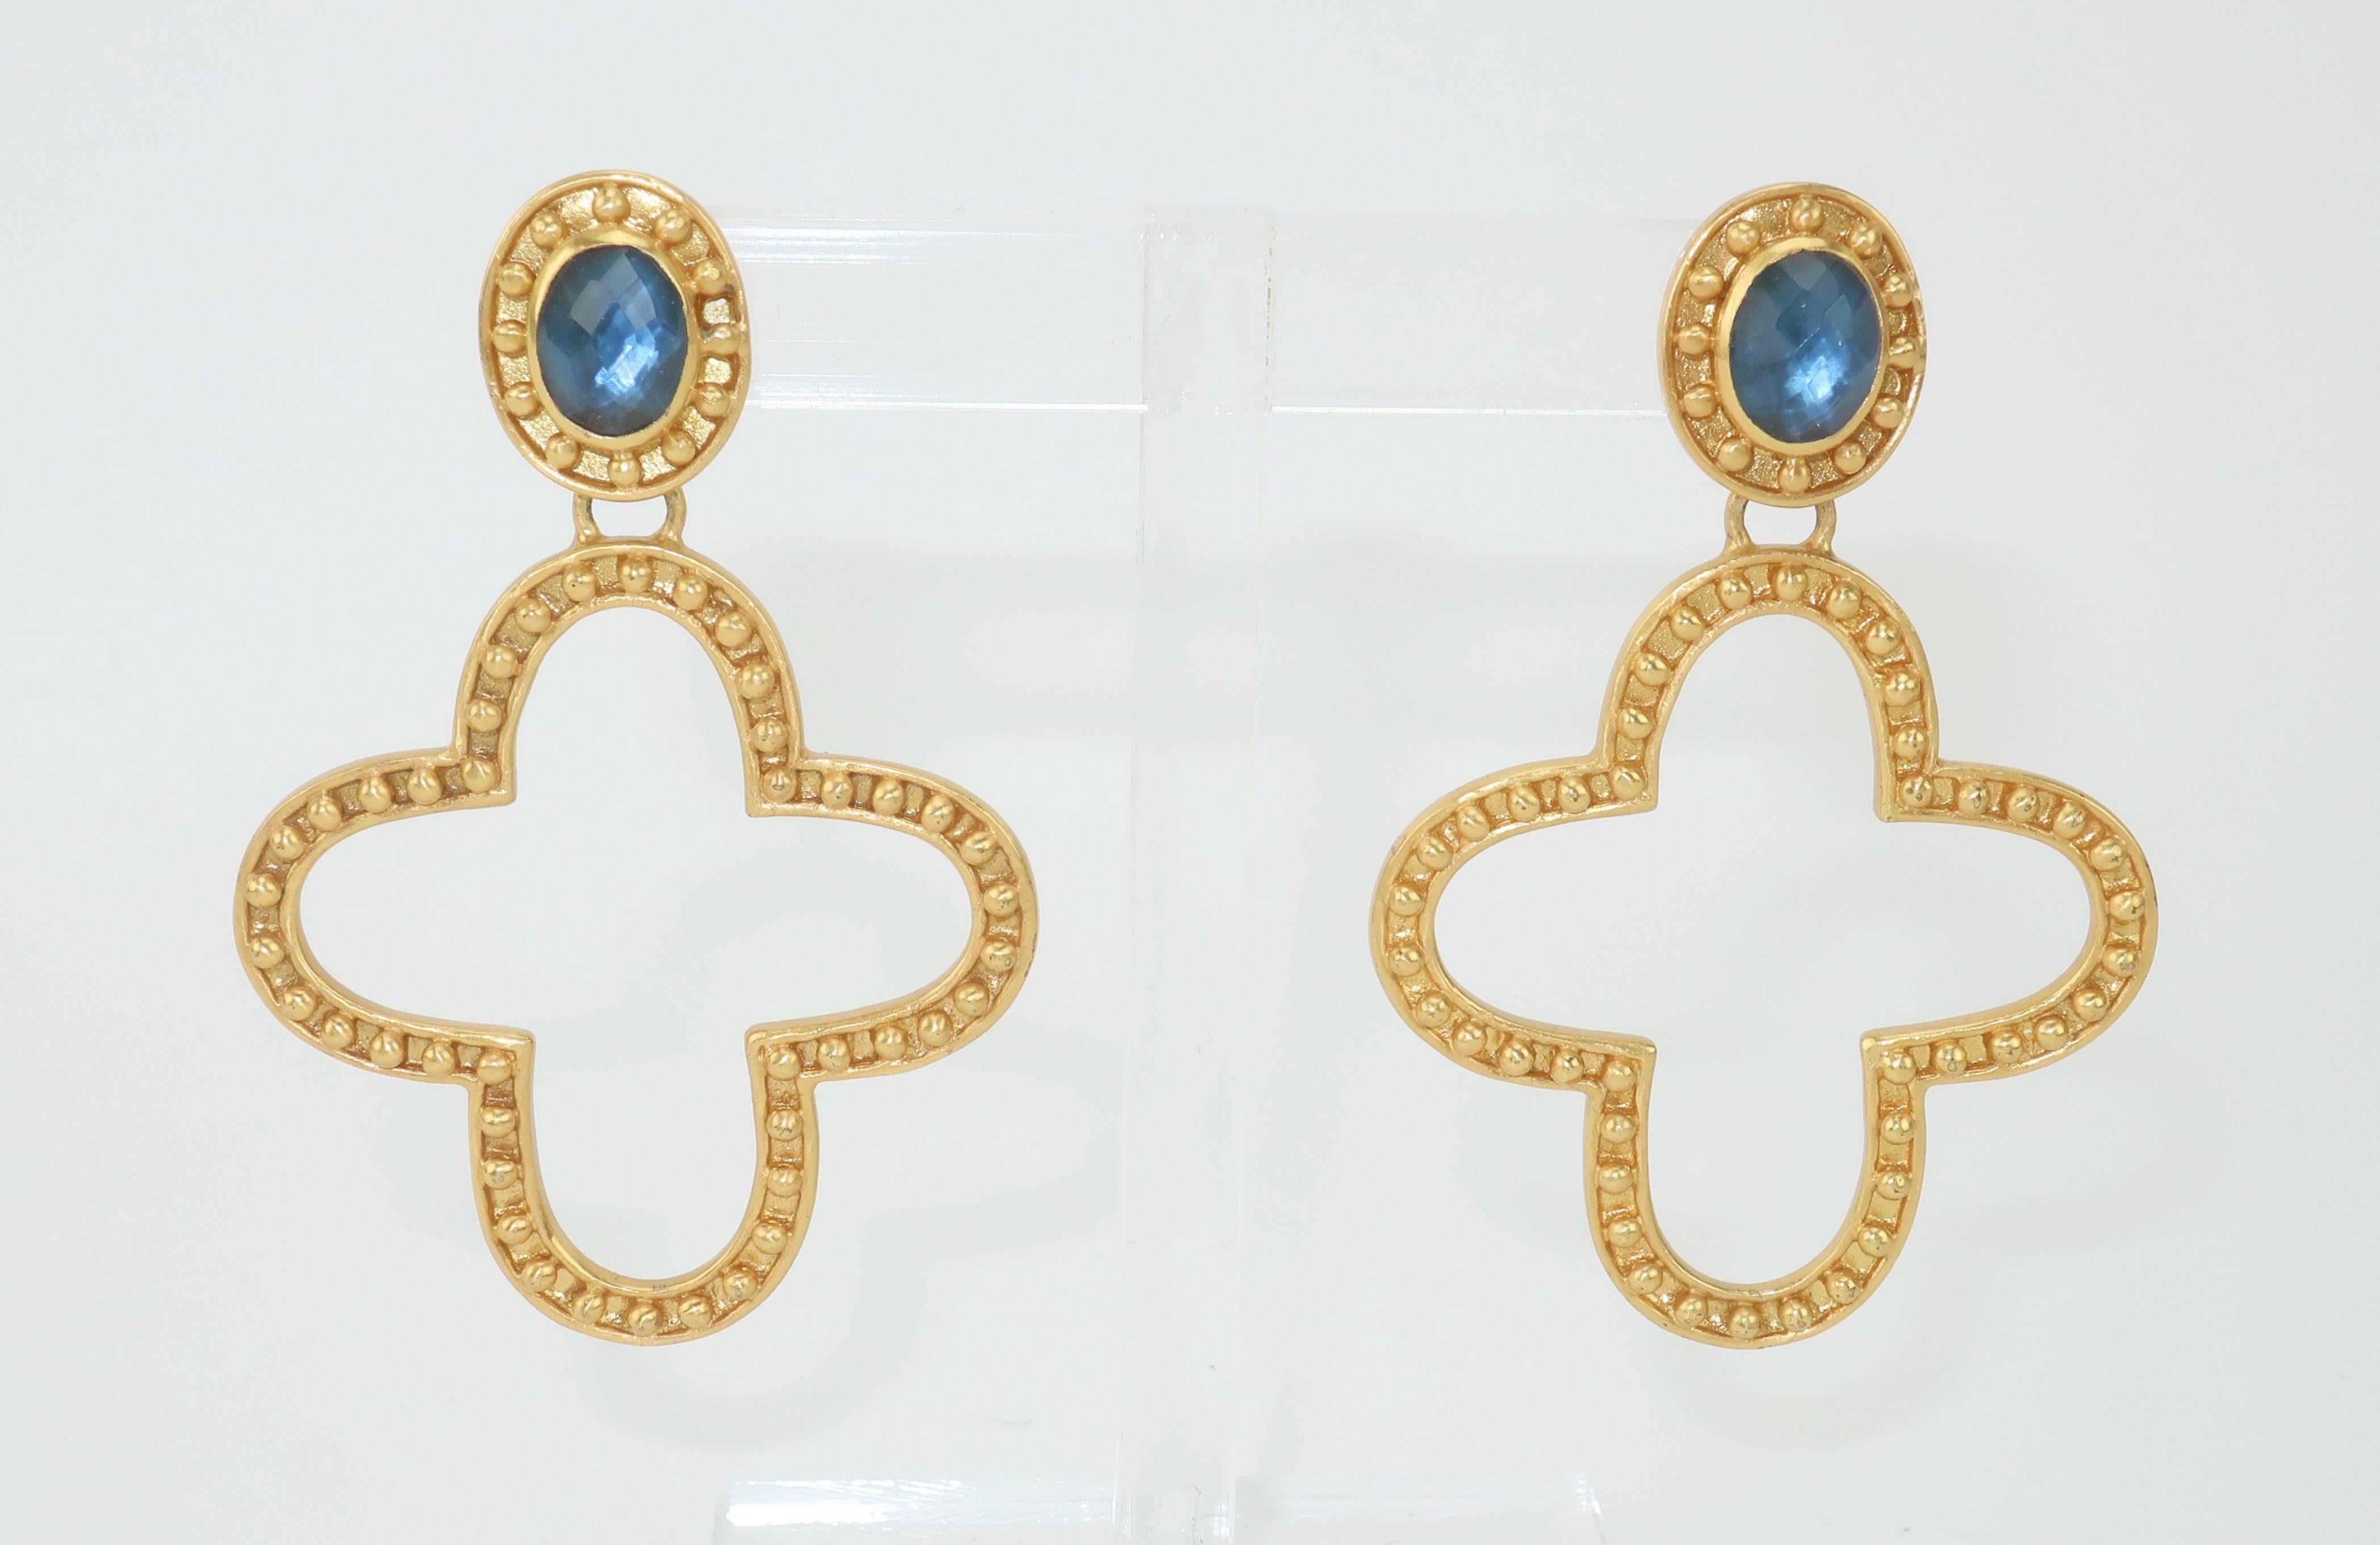 New York designer, Julie Vos, takes inspiration from classical art and architecture to create her beautiful costume jewelry which is made with the quality of fine jewelry.  This pair of dangle earrings is designed with faceted blue glass set in 24K